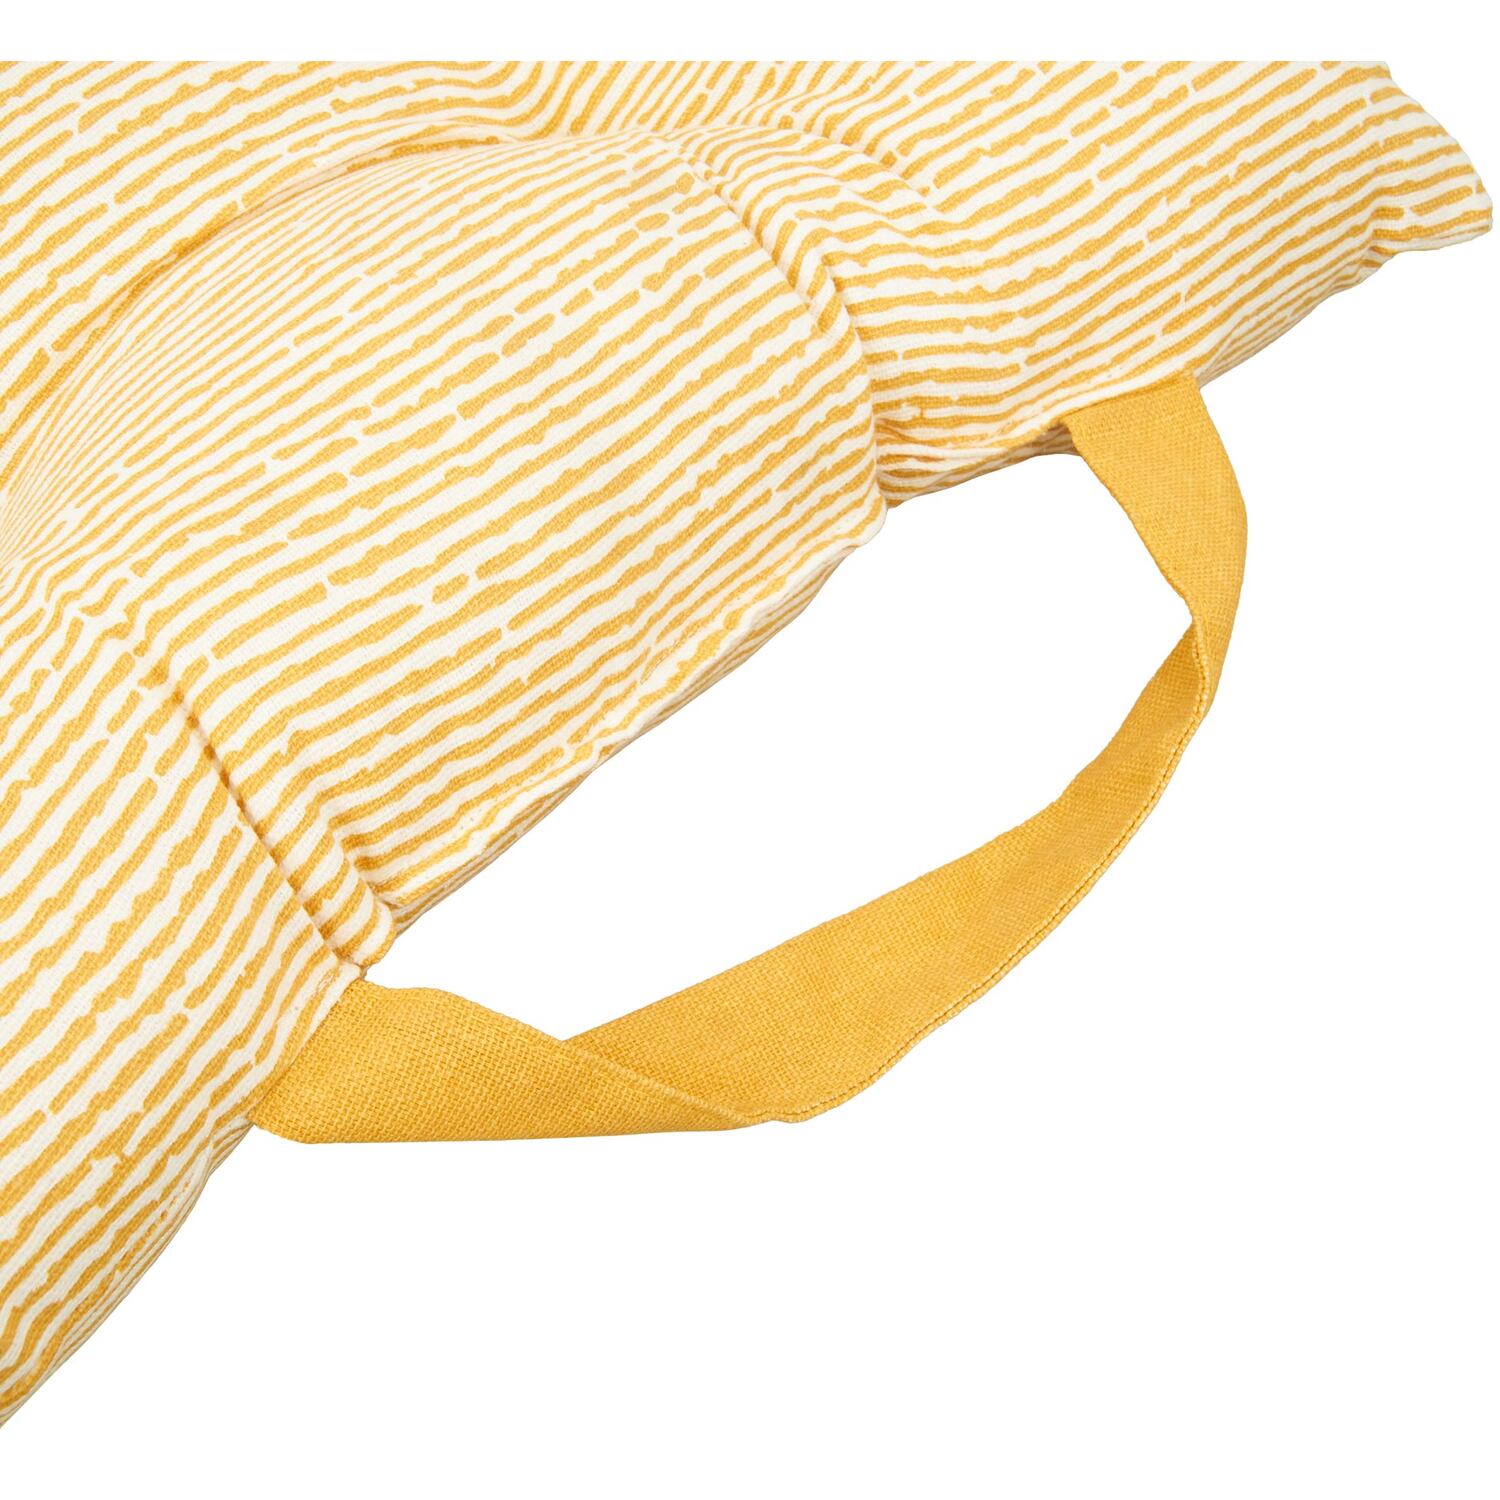 Printed Seat Pad with Handle - Yellow Image 2